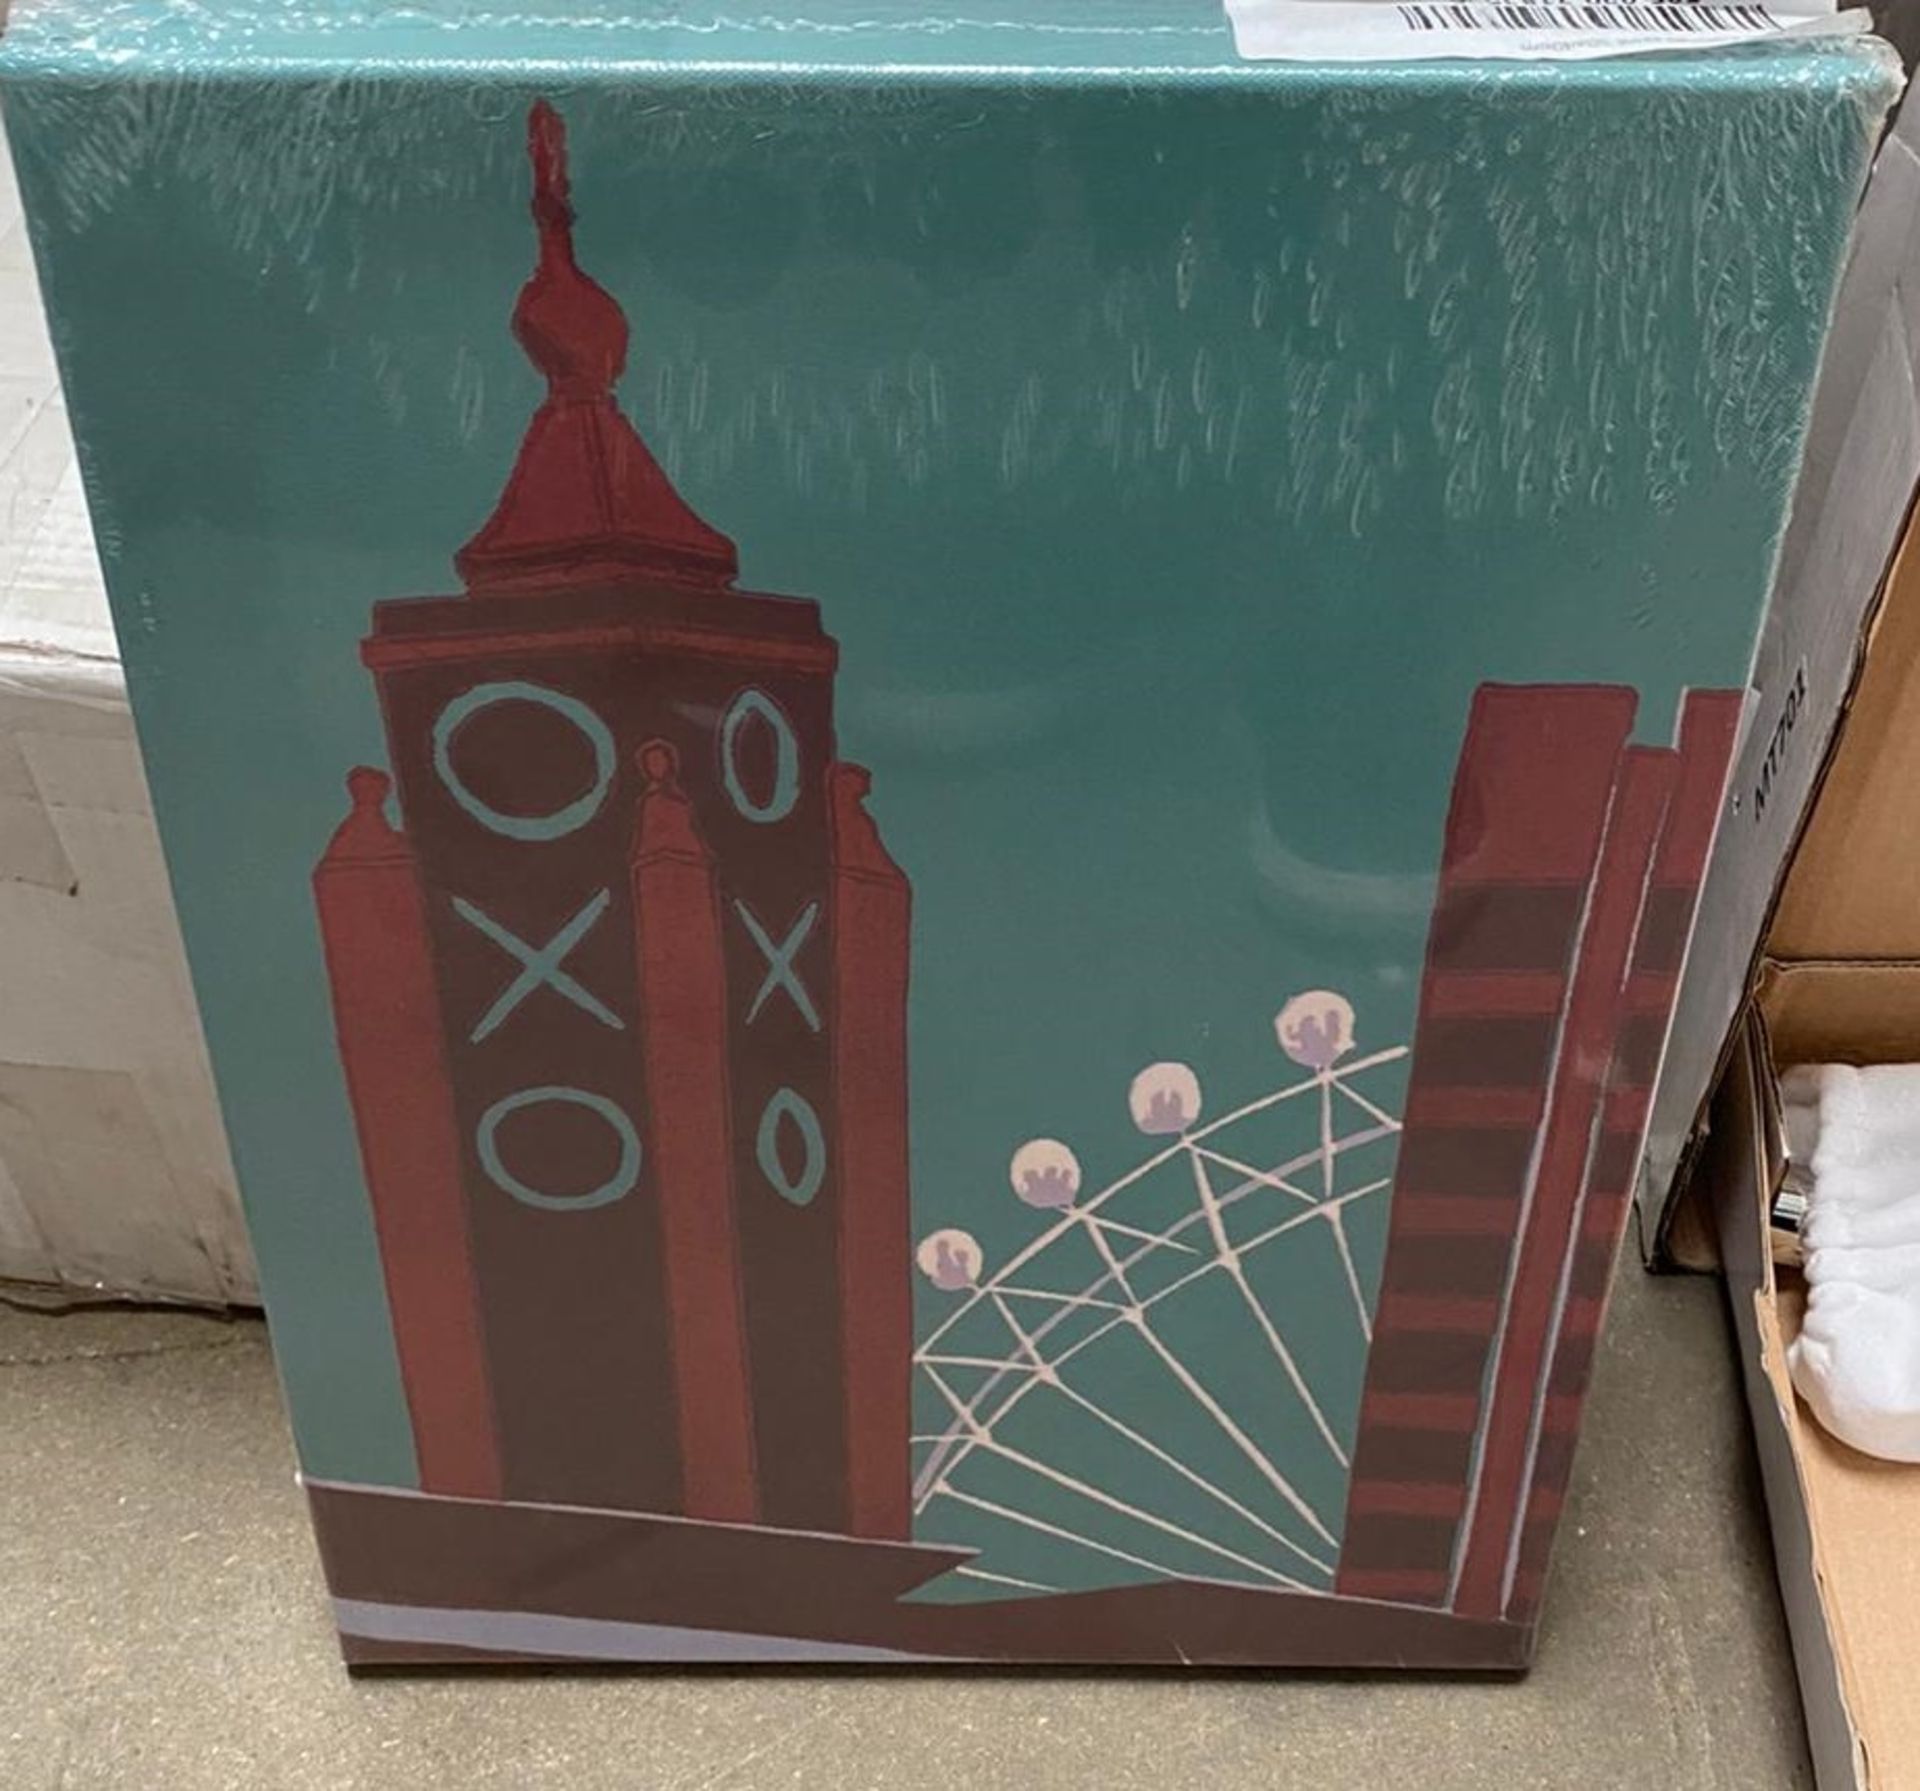 3 x Assorted Selection of City Canvas Prints from Summer Thornton and Jennie Ing - New Stock - - Image 4 of 6